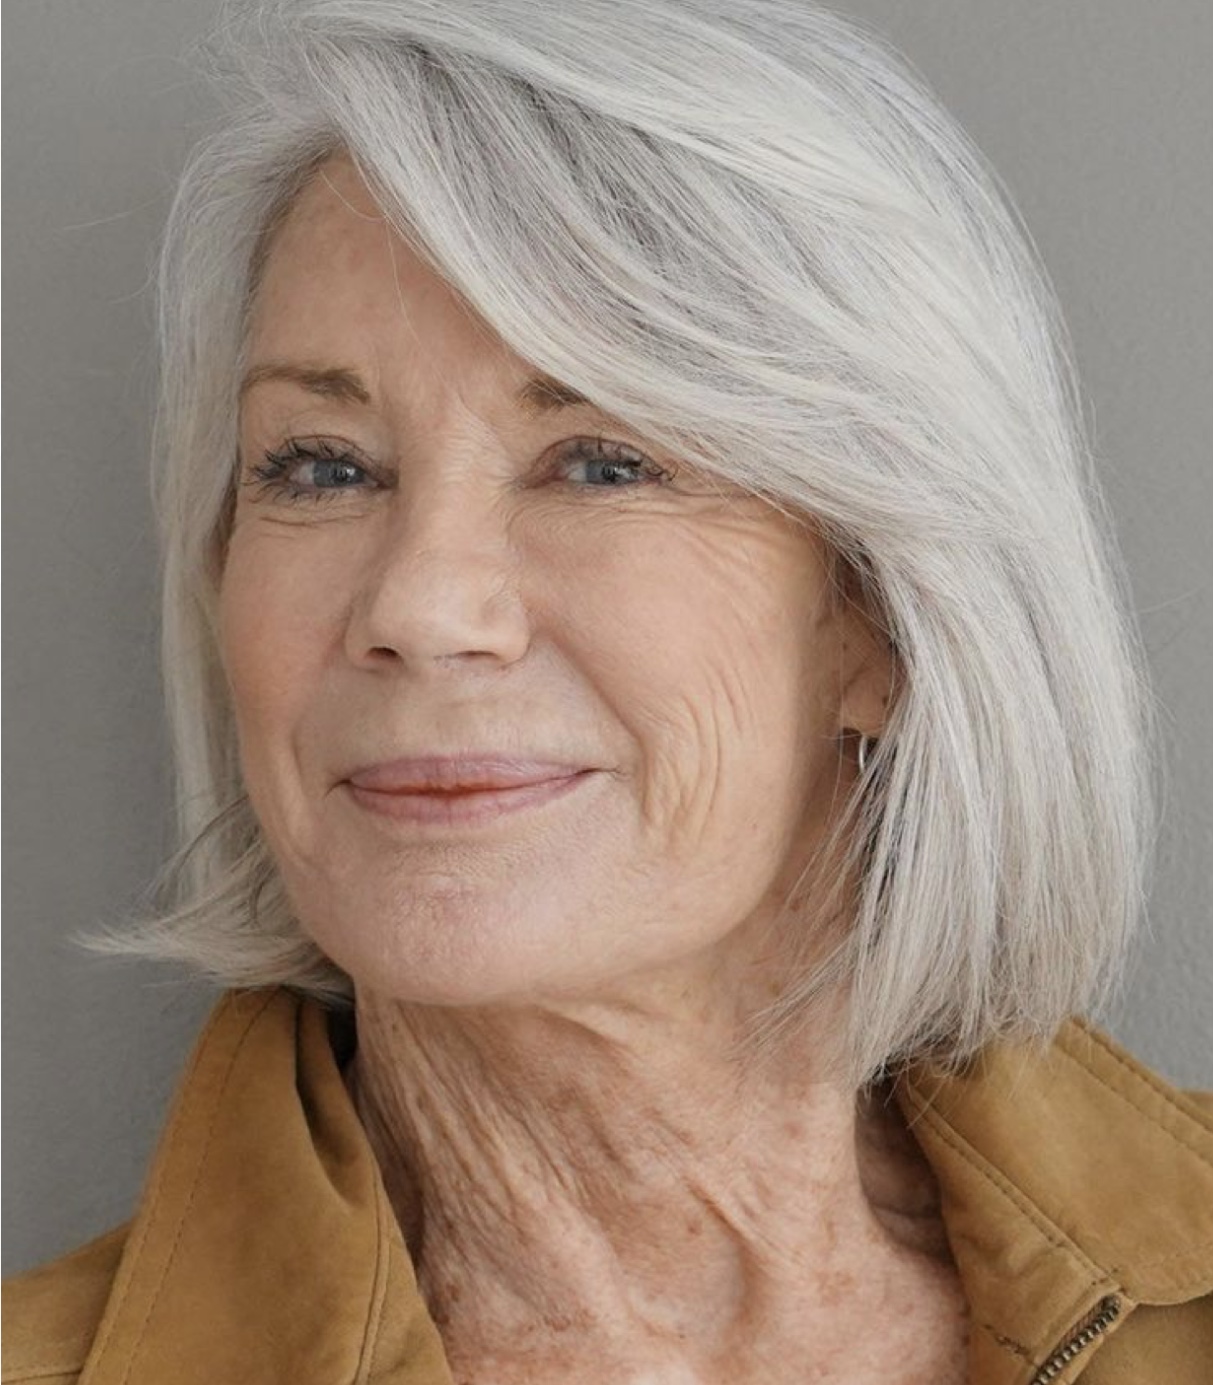 Short Haircuts For Over 60